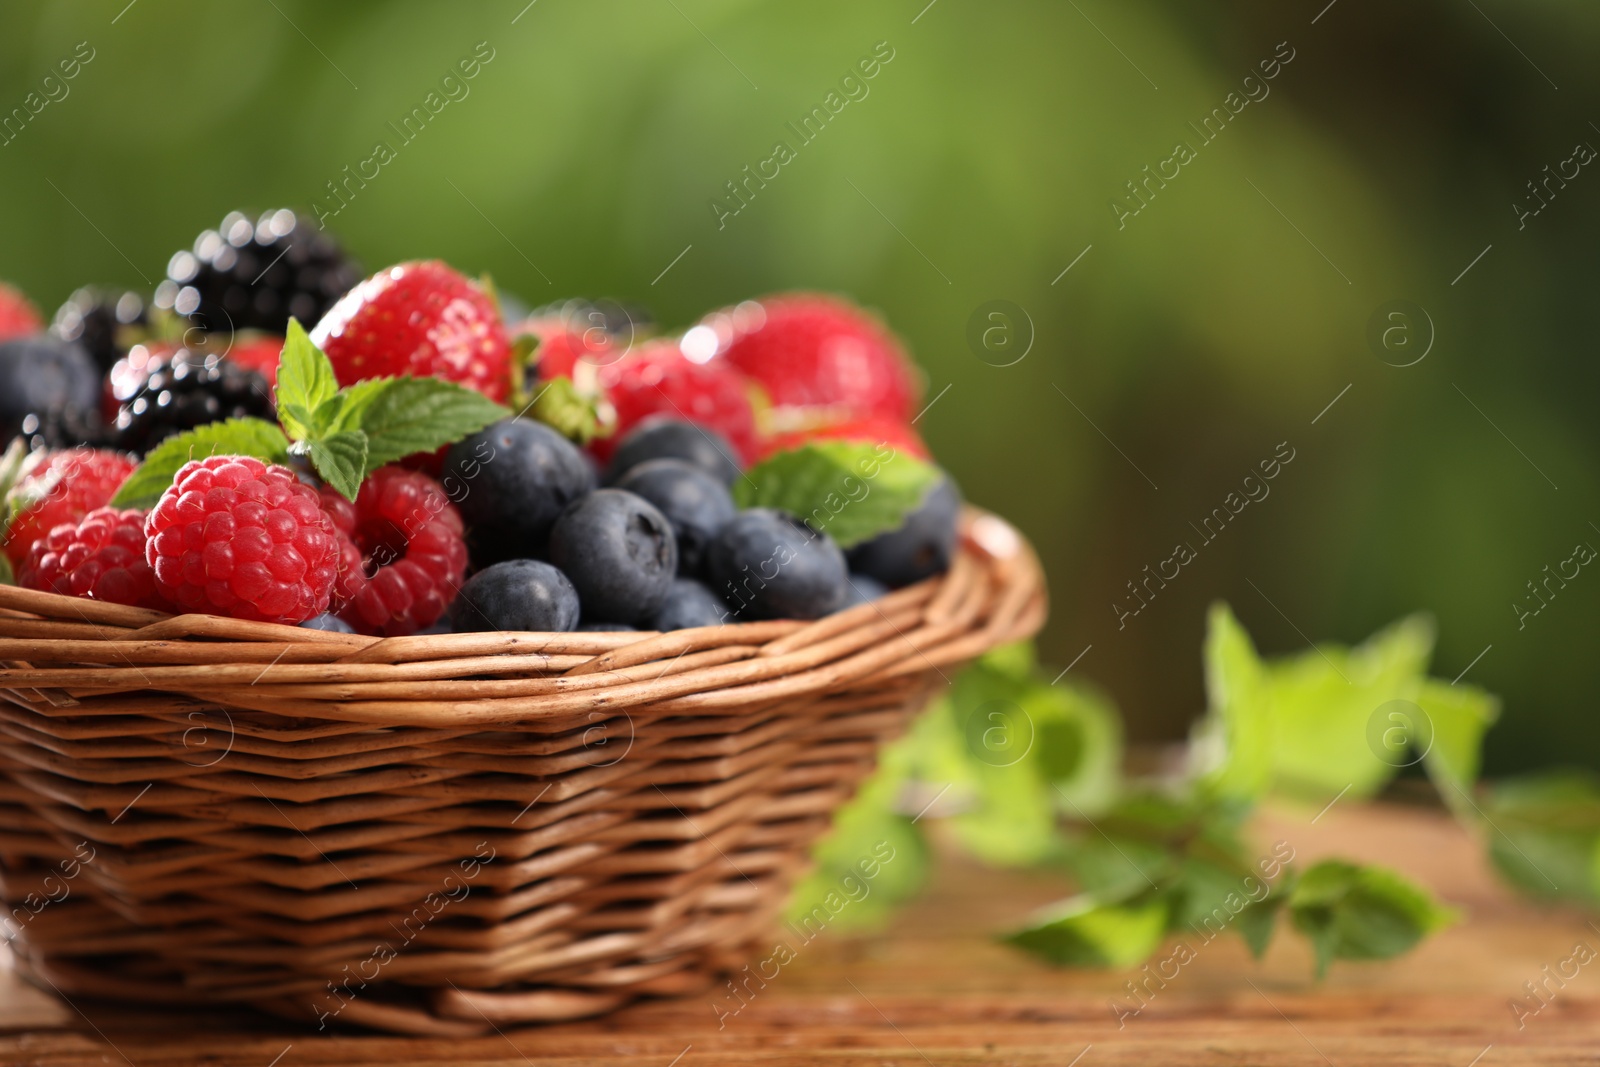 Photo of Wicker bowl with different fresh ripe berries and mint on wooden table outdoors, space for text